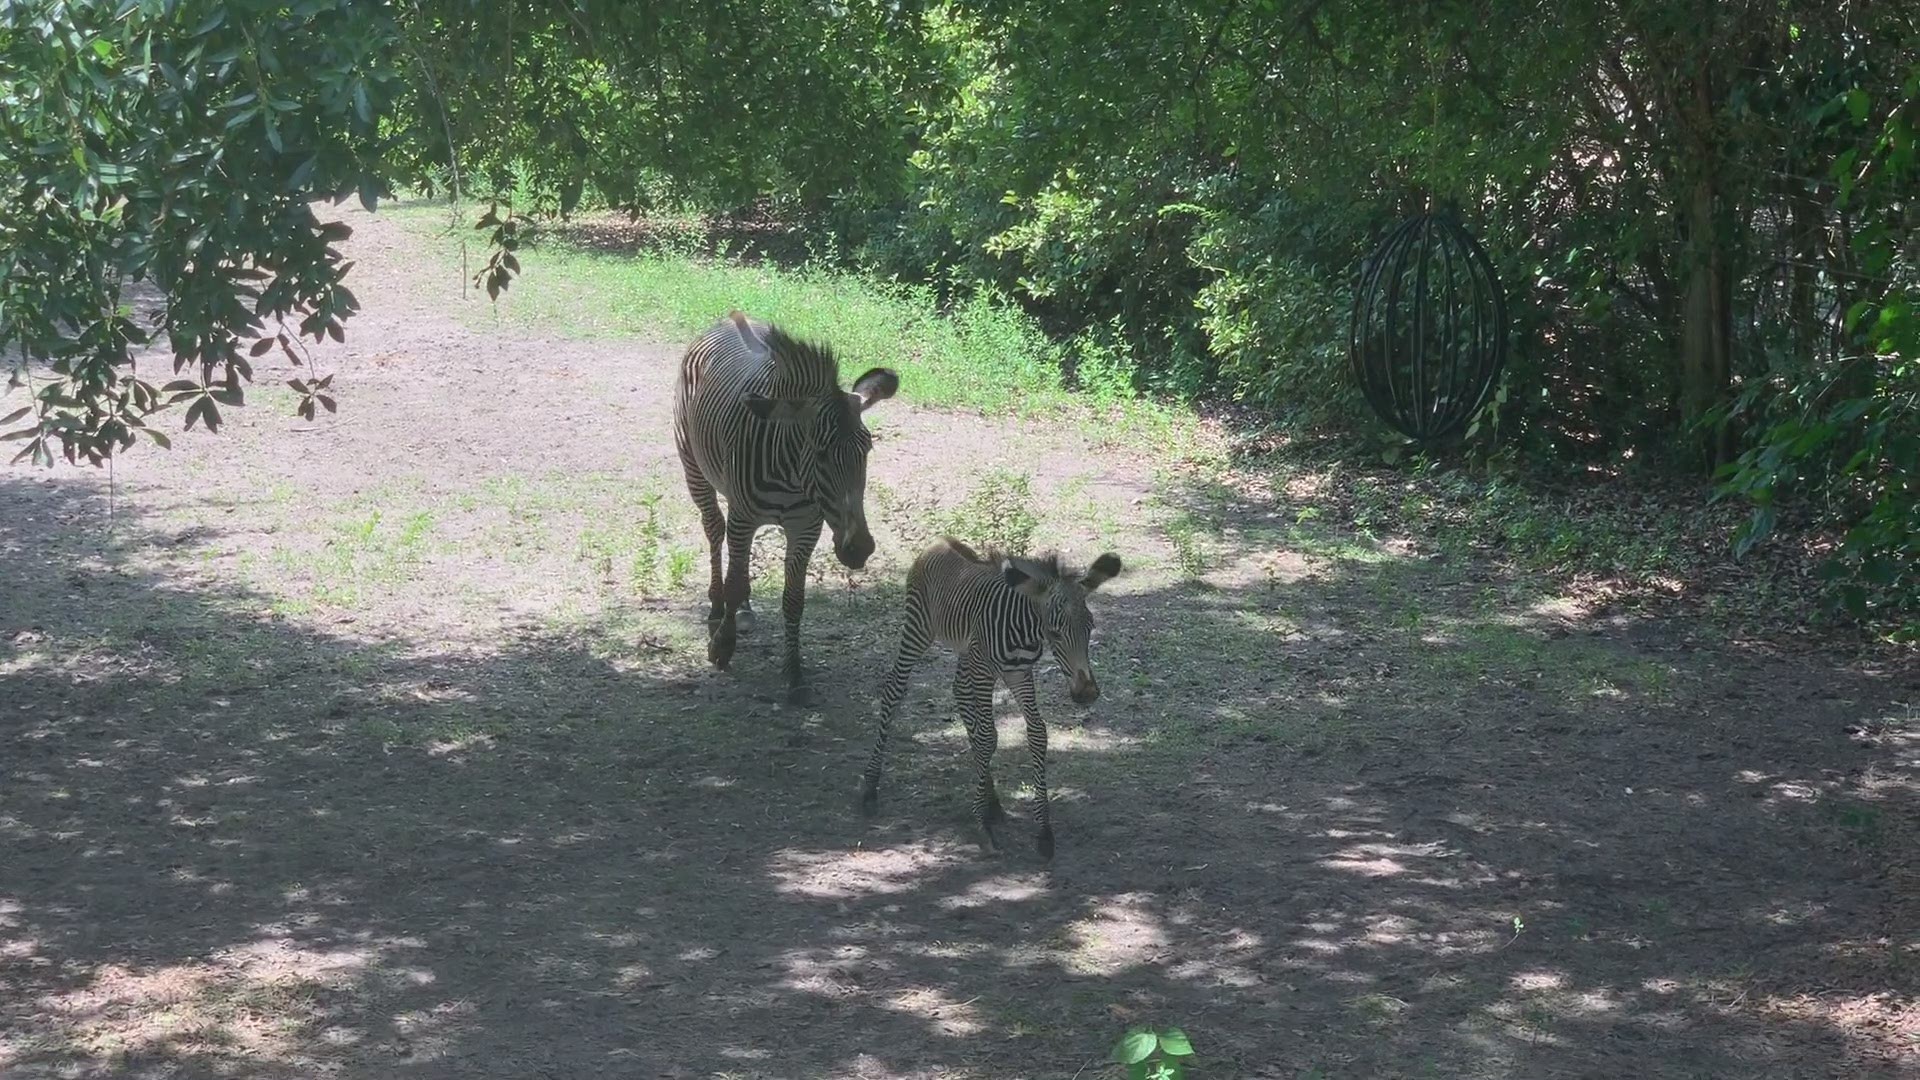 The Jacksonville Zoo and Gardens (JZG) is excited to announce the birth of a healthy Grevy’s zebra born early Sunday morning.